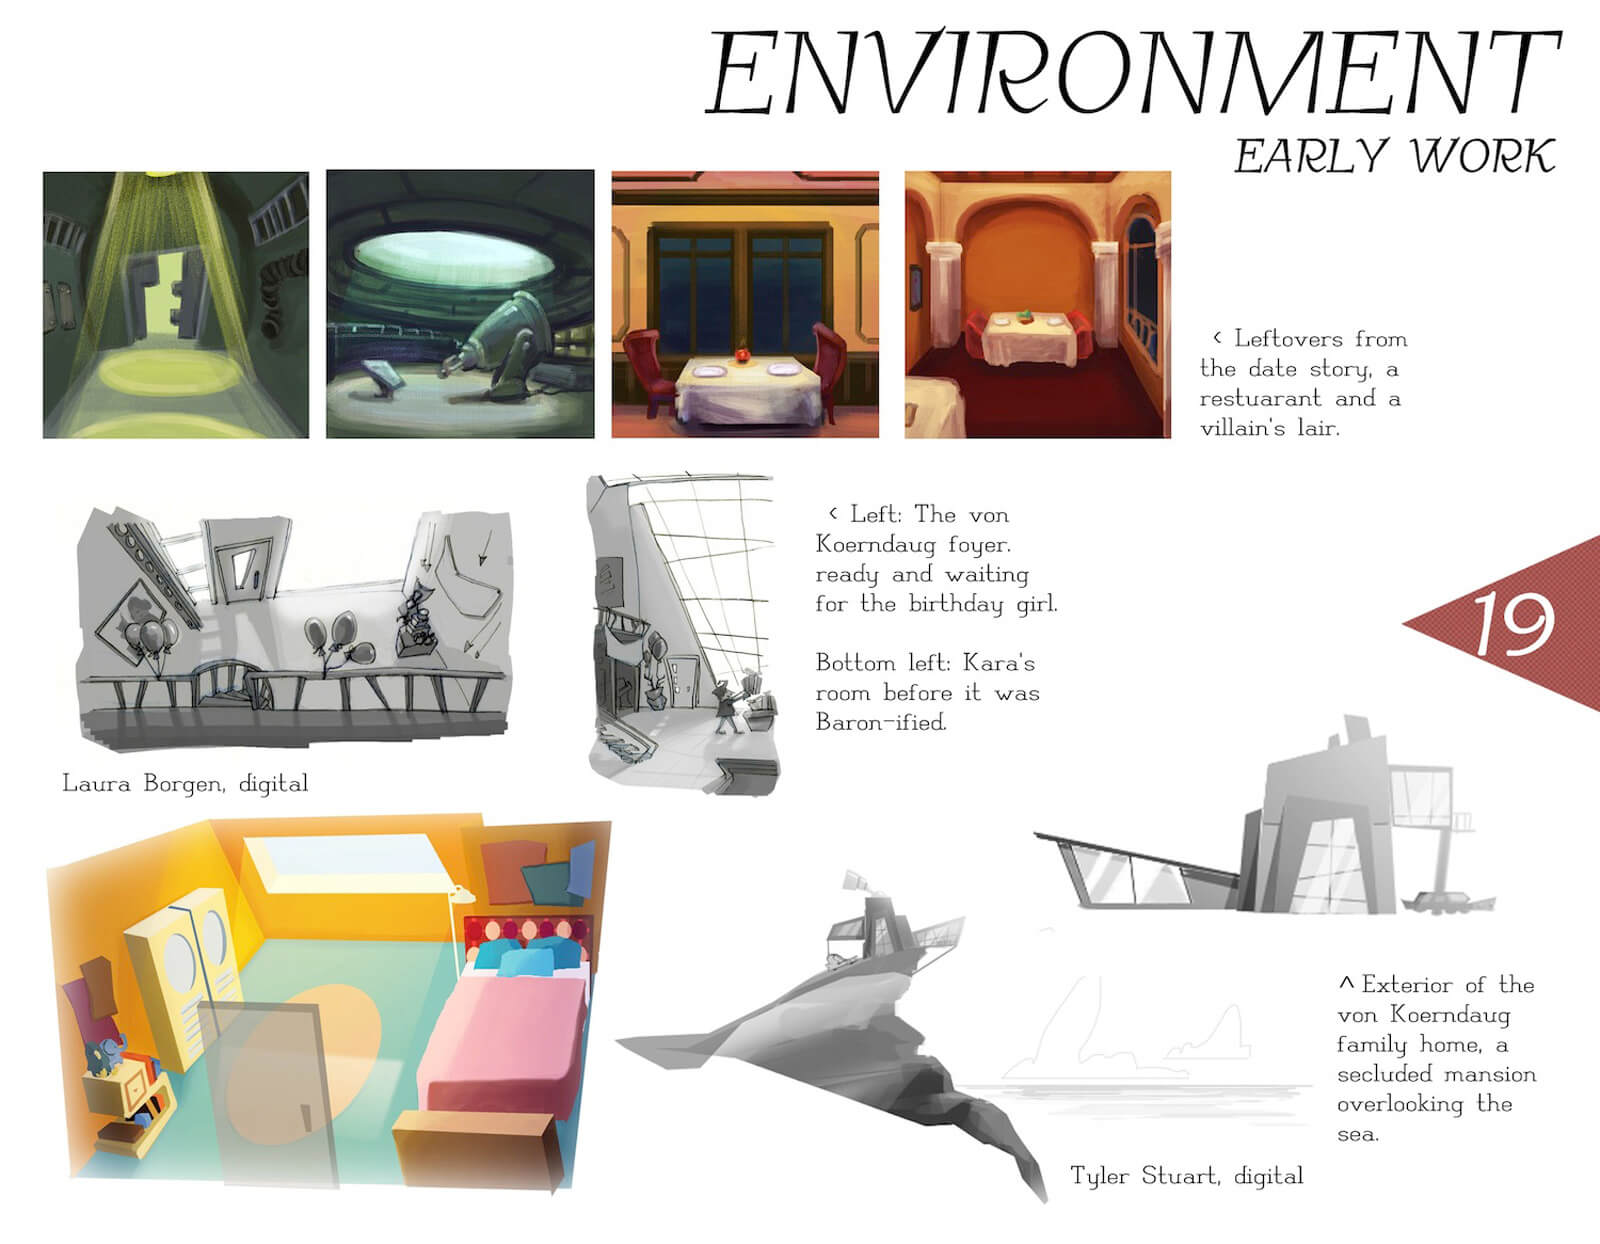 Early concept art of the environment in the film Super Secret, including unused restaurant and villain's lair settings